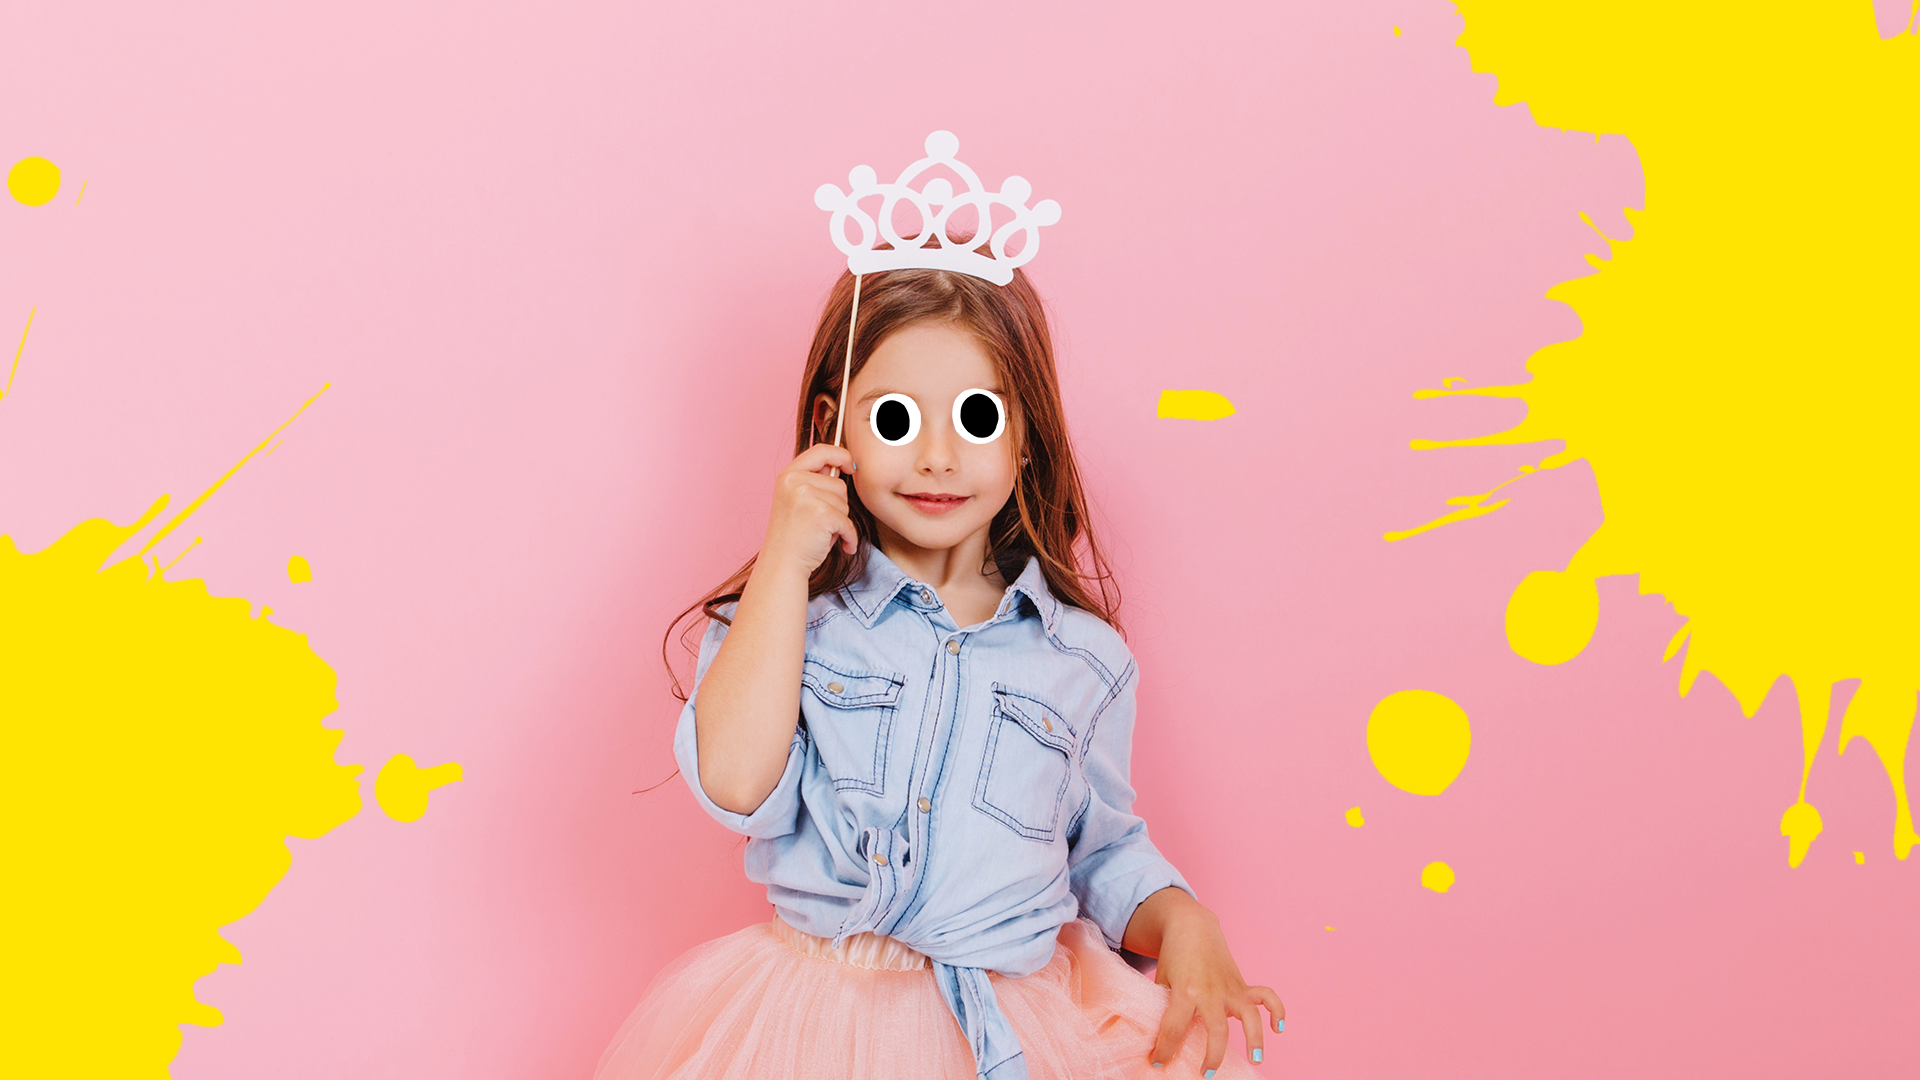 Princess girl on pink background with yellow splats